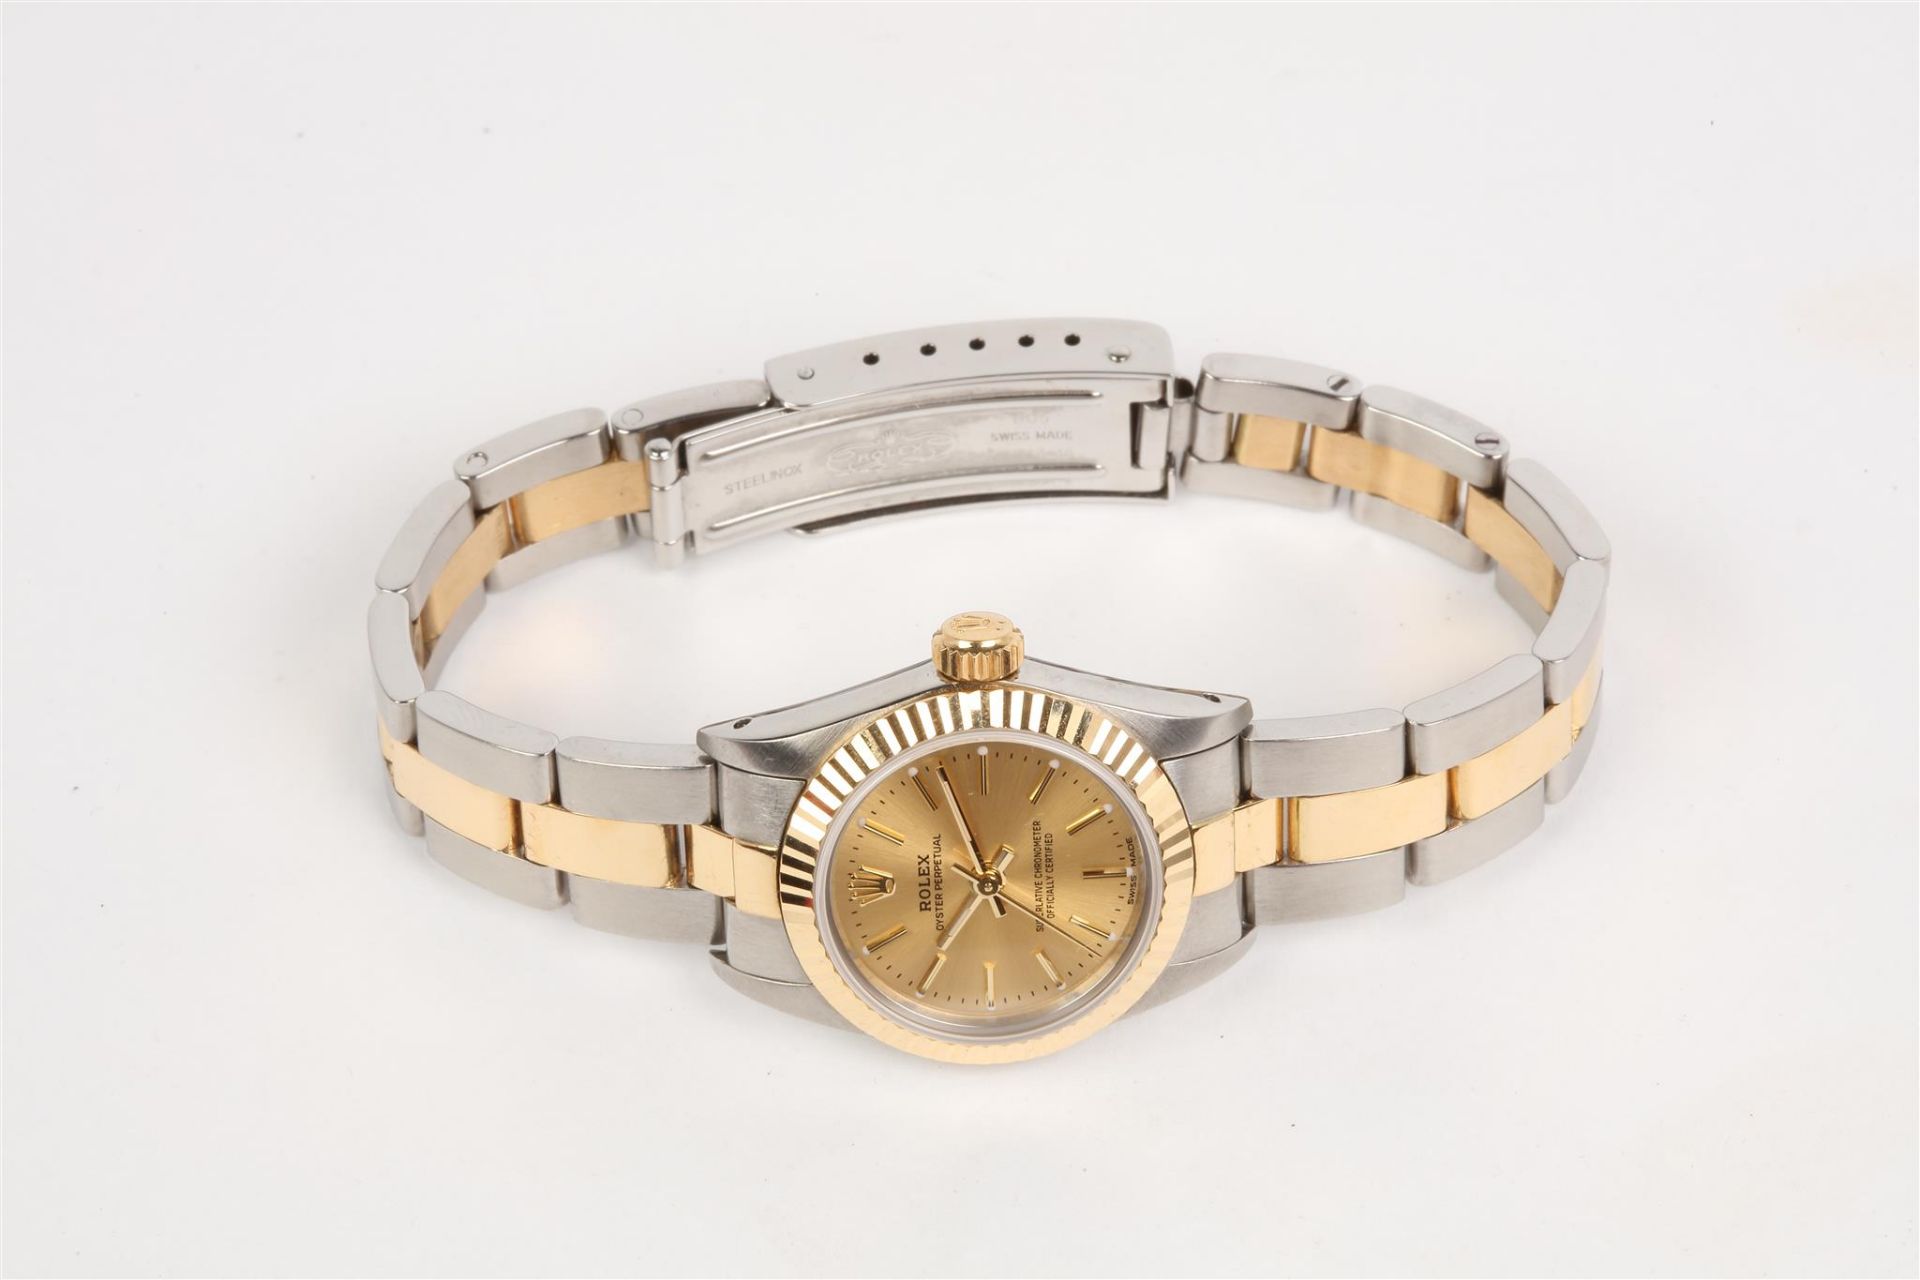 No VAT Ladies Rolex Oyster Perpetual Watch - Model 67193 - Gold & Stainless Steel Strap With Gold - Image 3 of 4